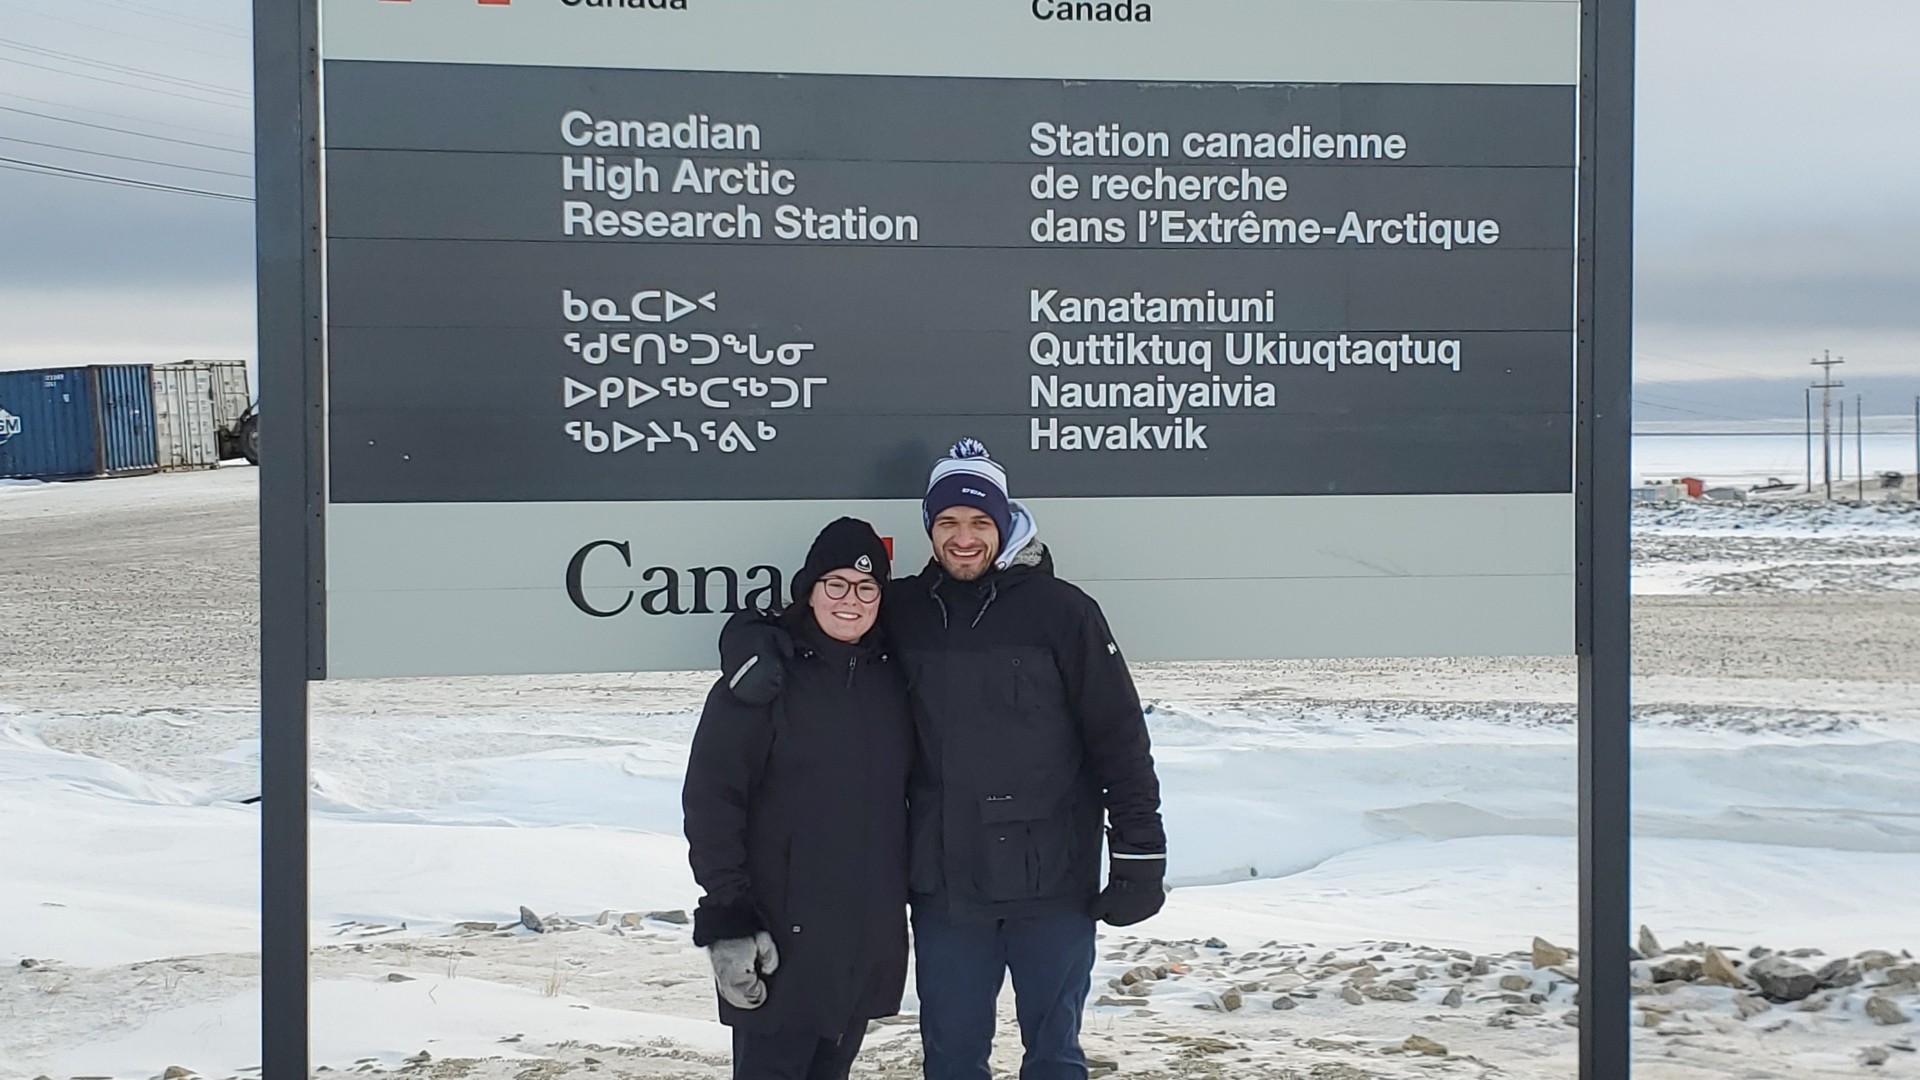 Two people in jackets standing in front of a sign in an Arctic location